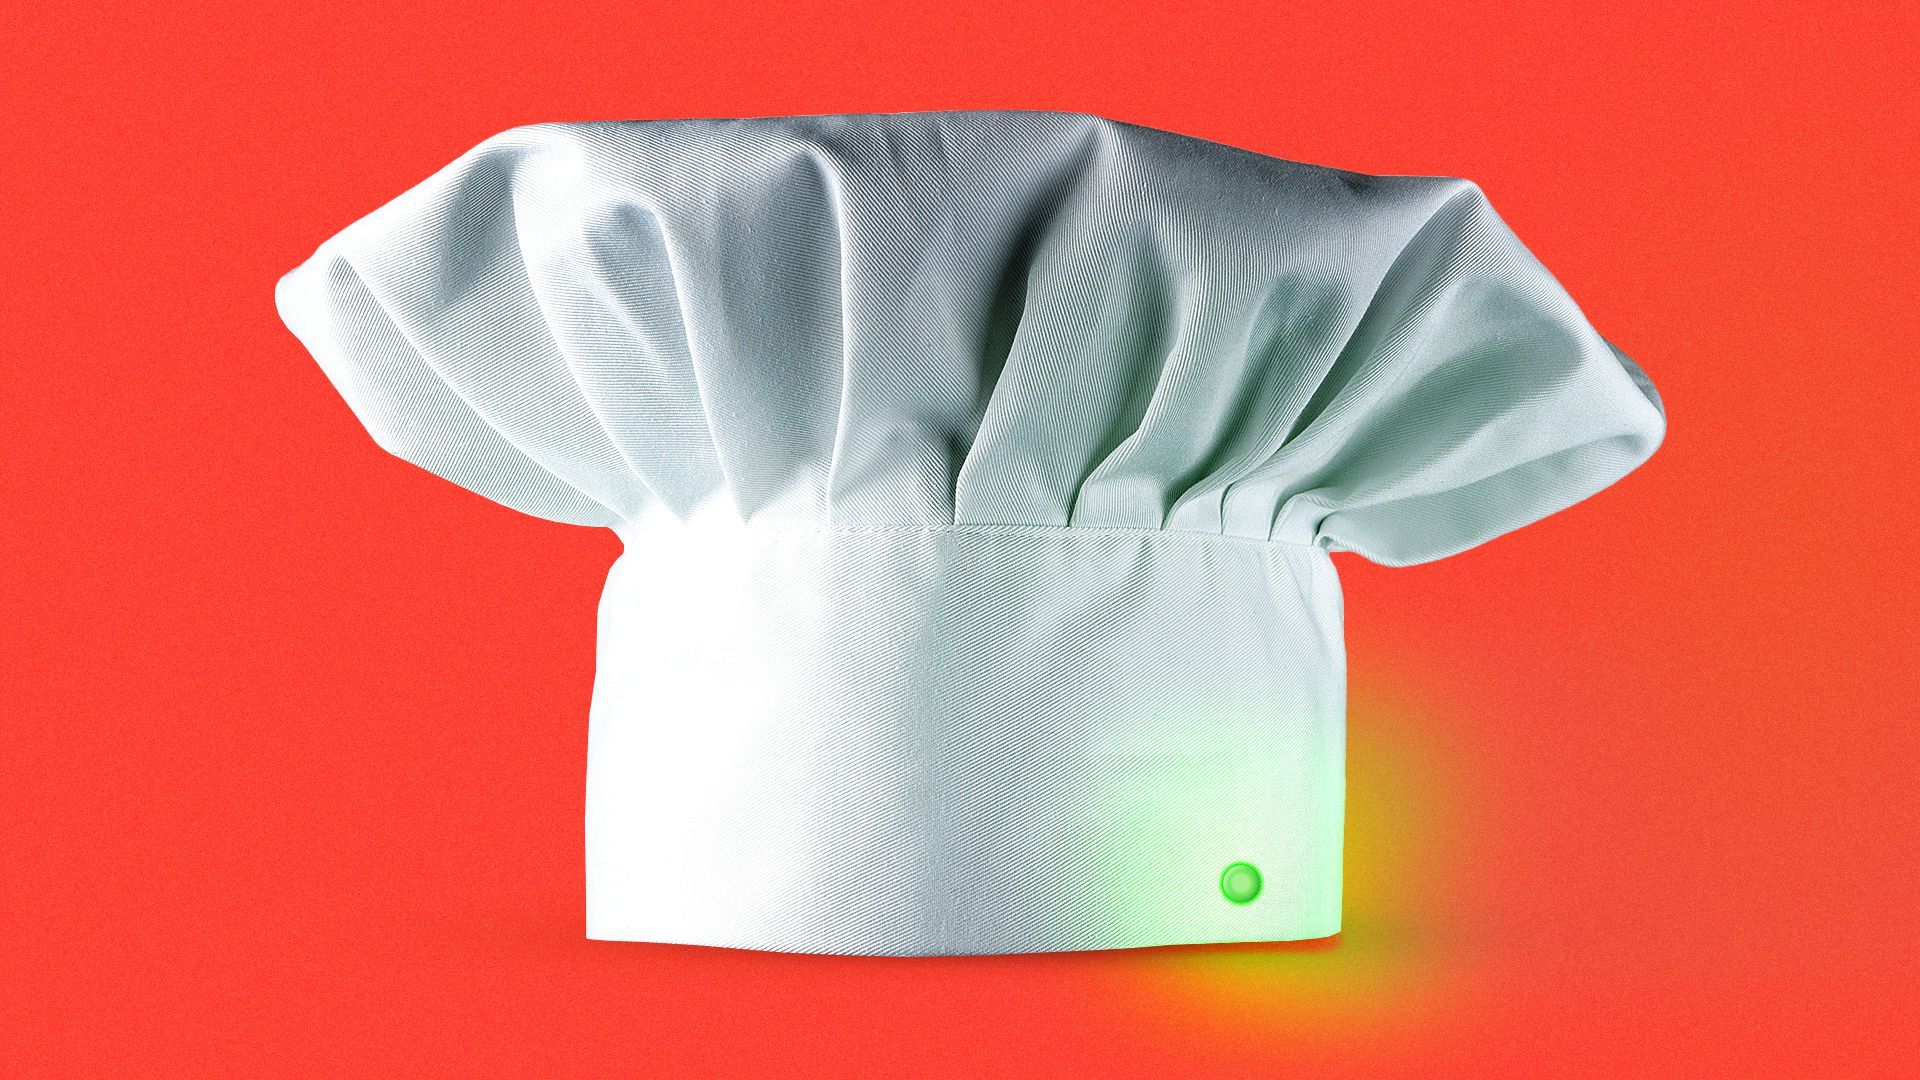 Animated illustration of a chef hat with a blinking green power light 